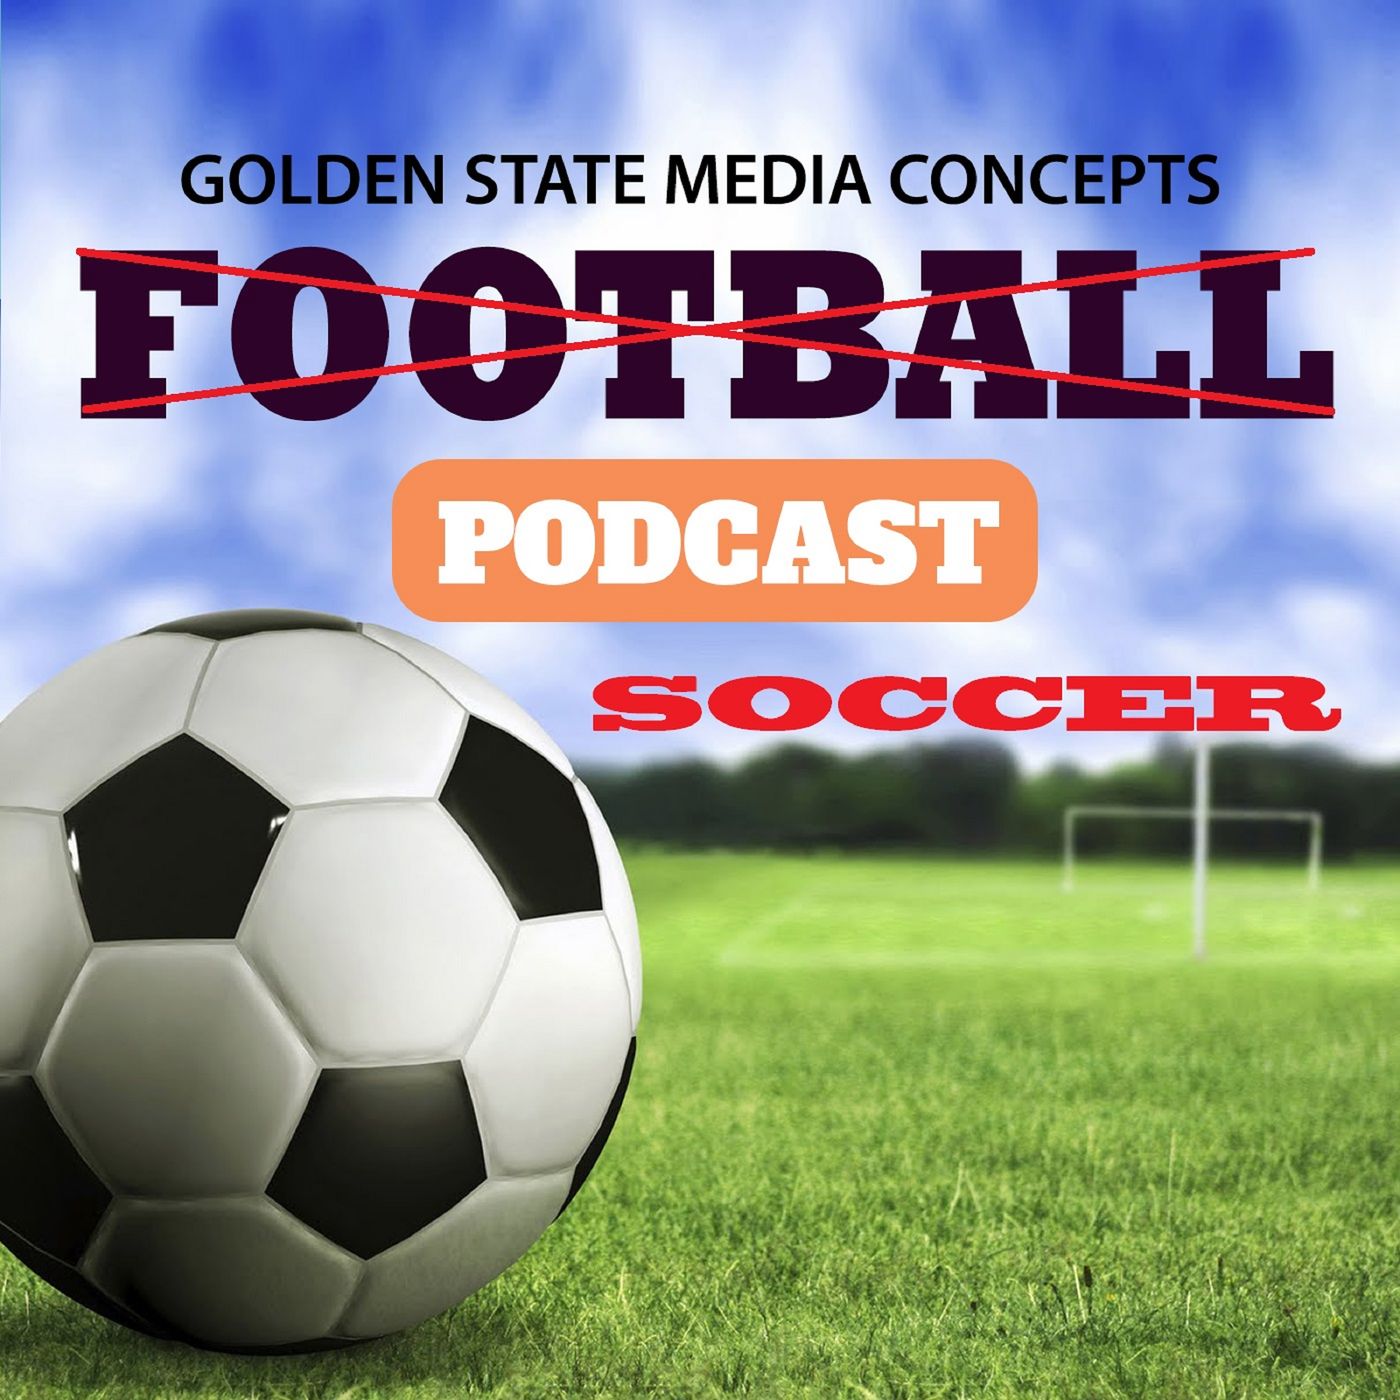 UCL Final Preview, Premier League UCL Contenders & Top Football Headlines | The GSMC Soccer Podcast by GSMC Sports